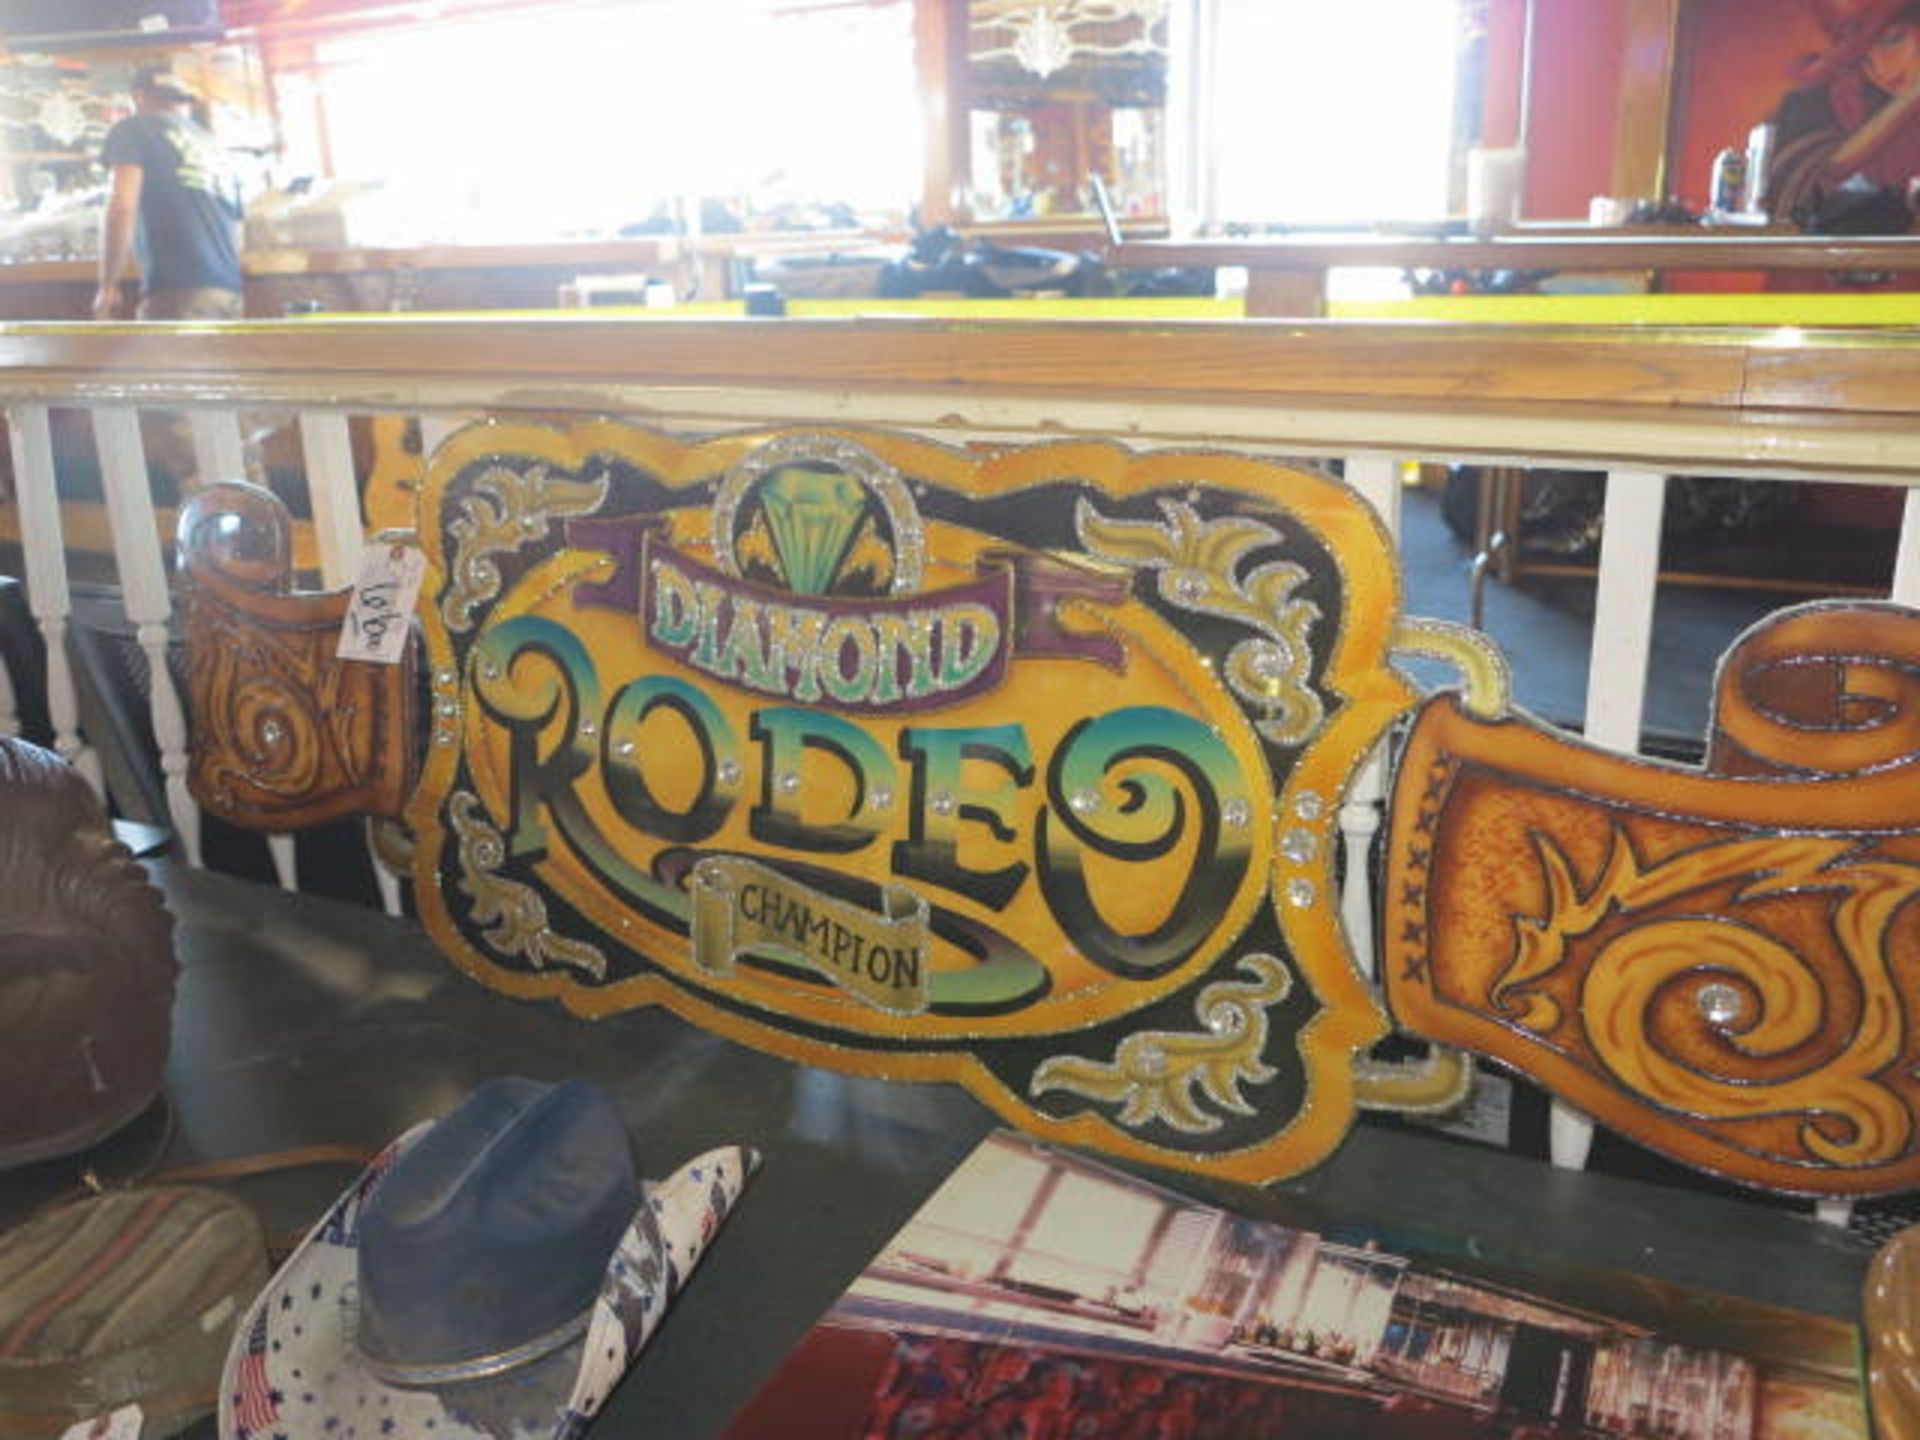 Diamond Rodeo Hand Painted Wooden Sign